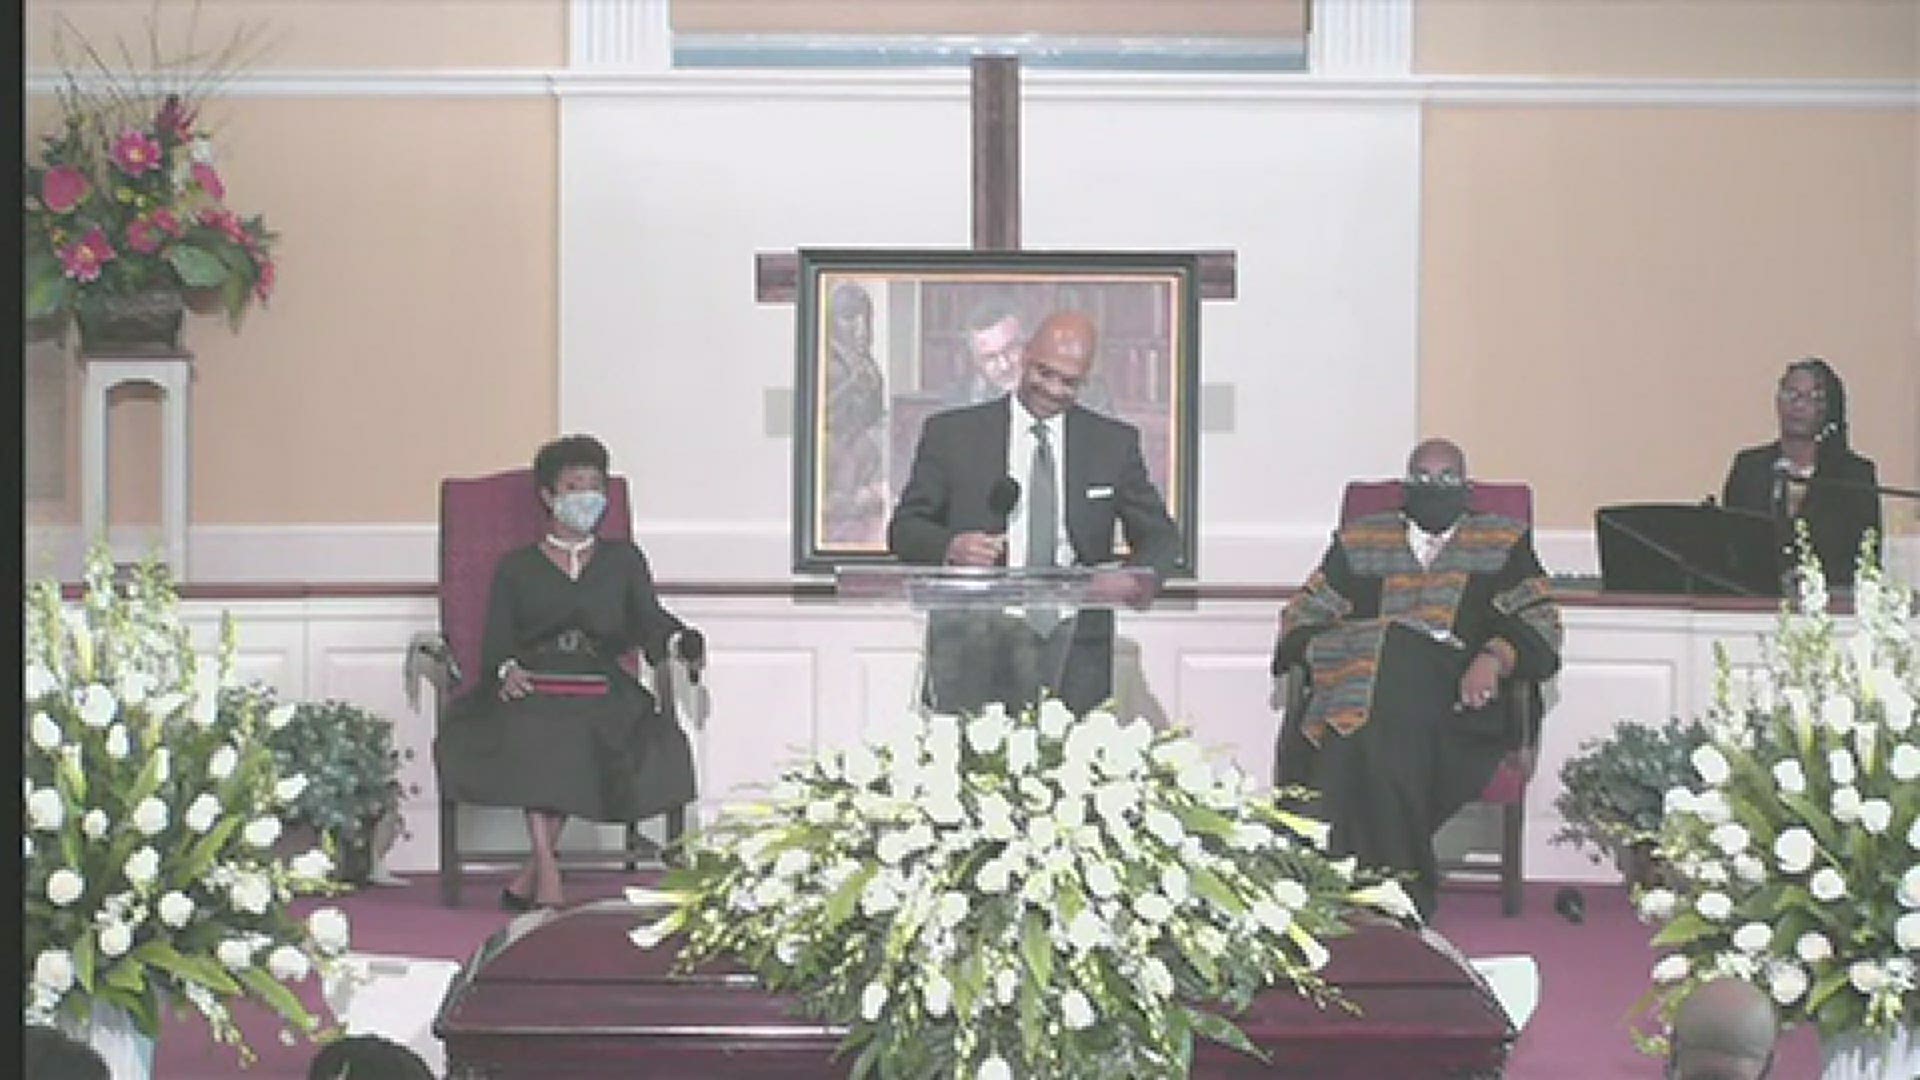 Al Vivian was among the speakers on Thursday at the funeral for his father, Civil Rights icon C.T. Vivian, in Atlanta.